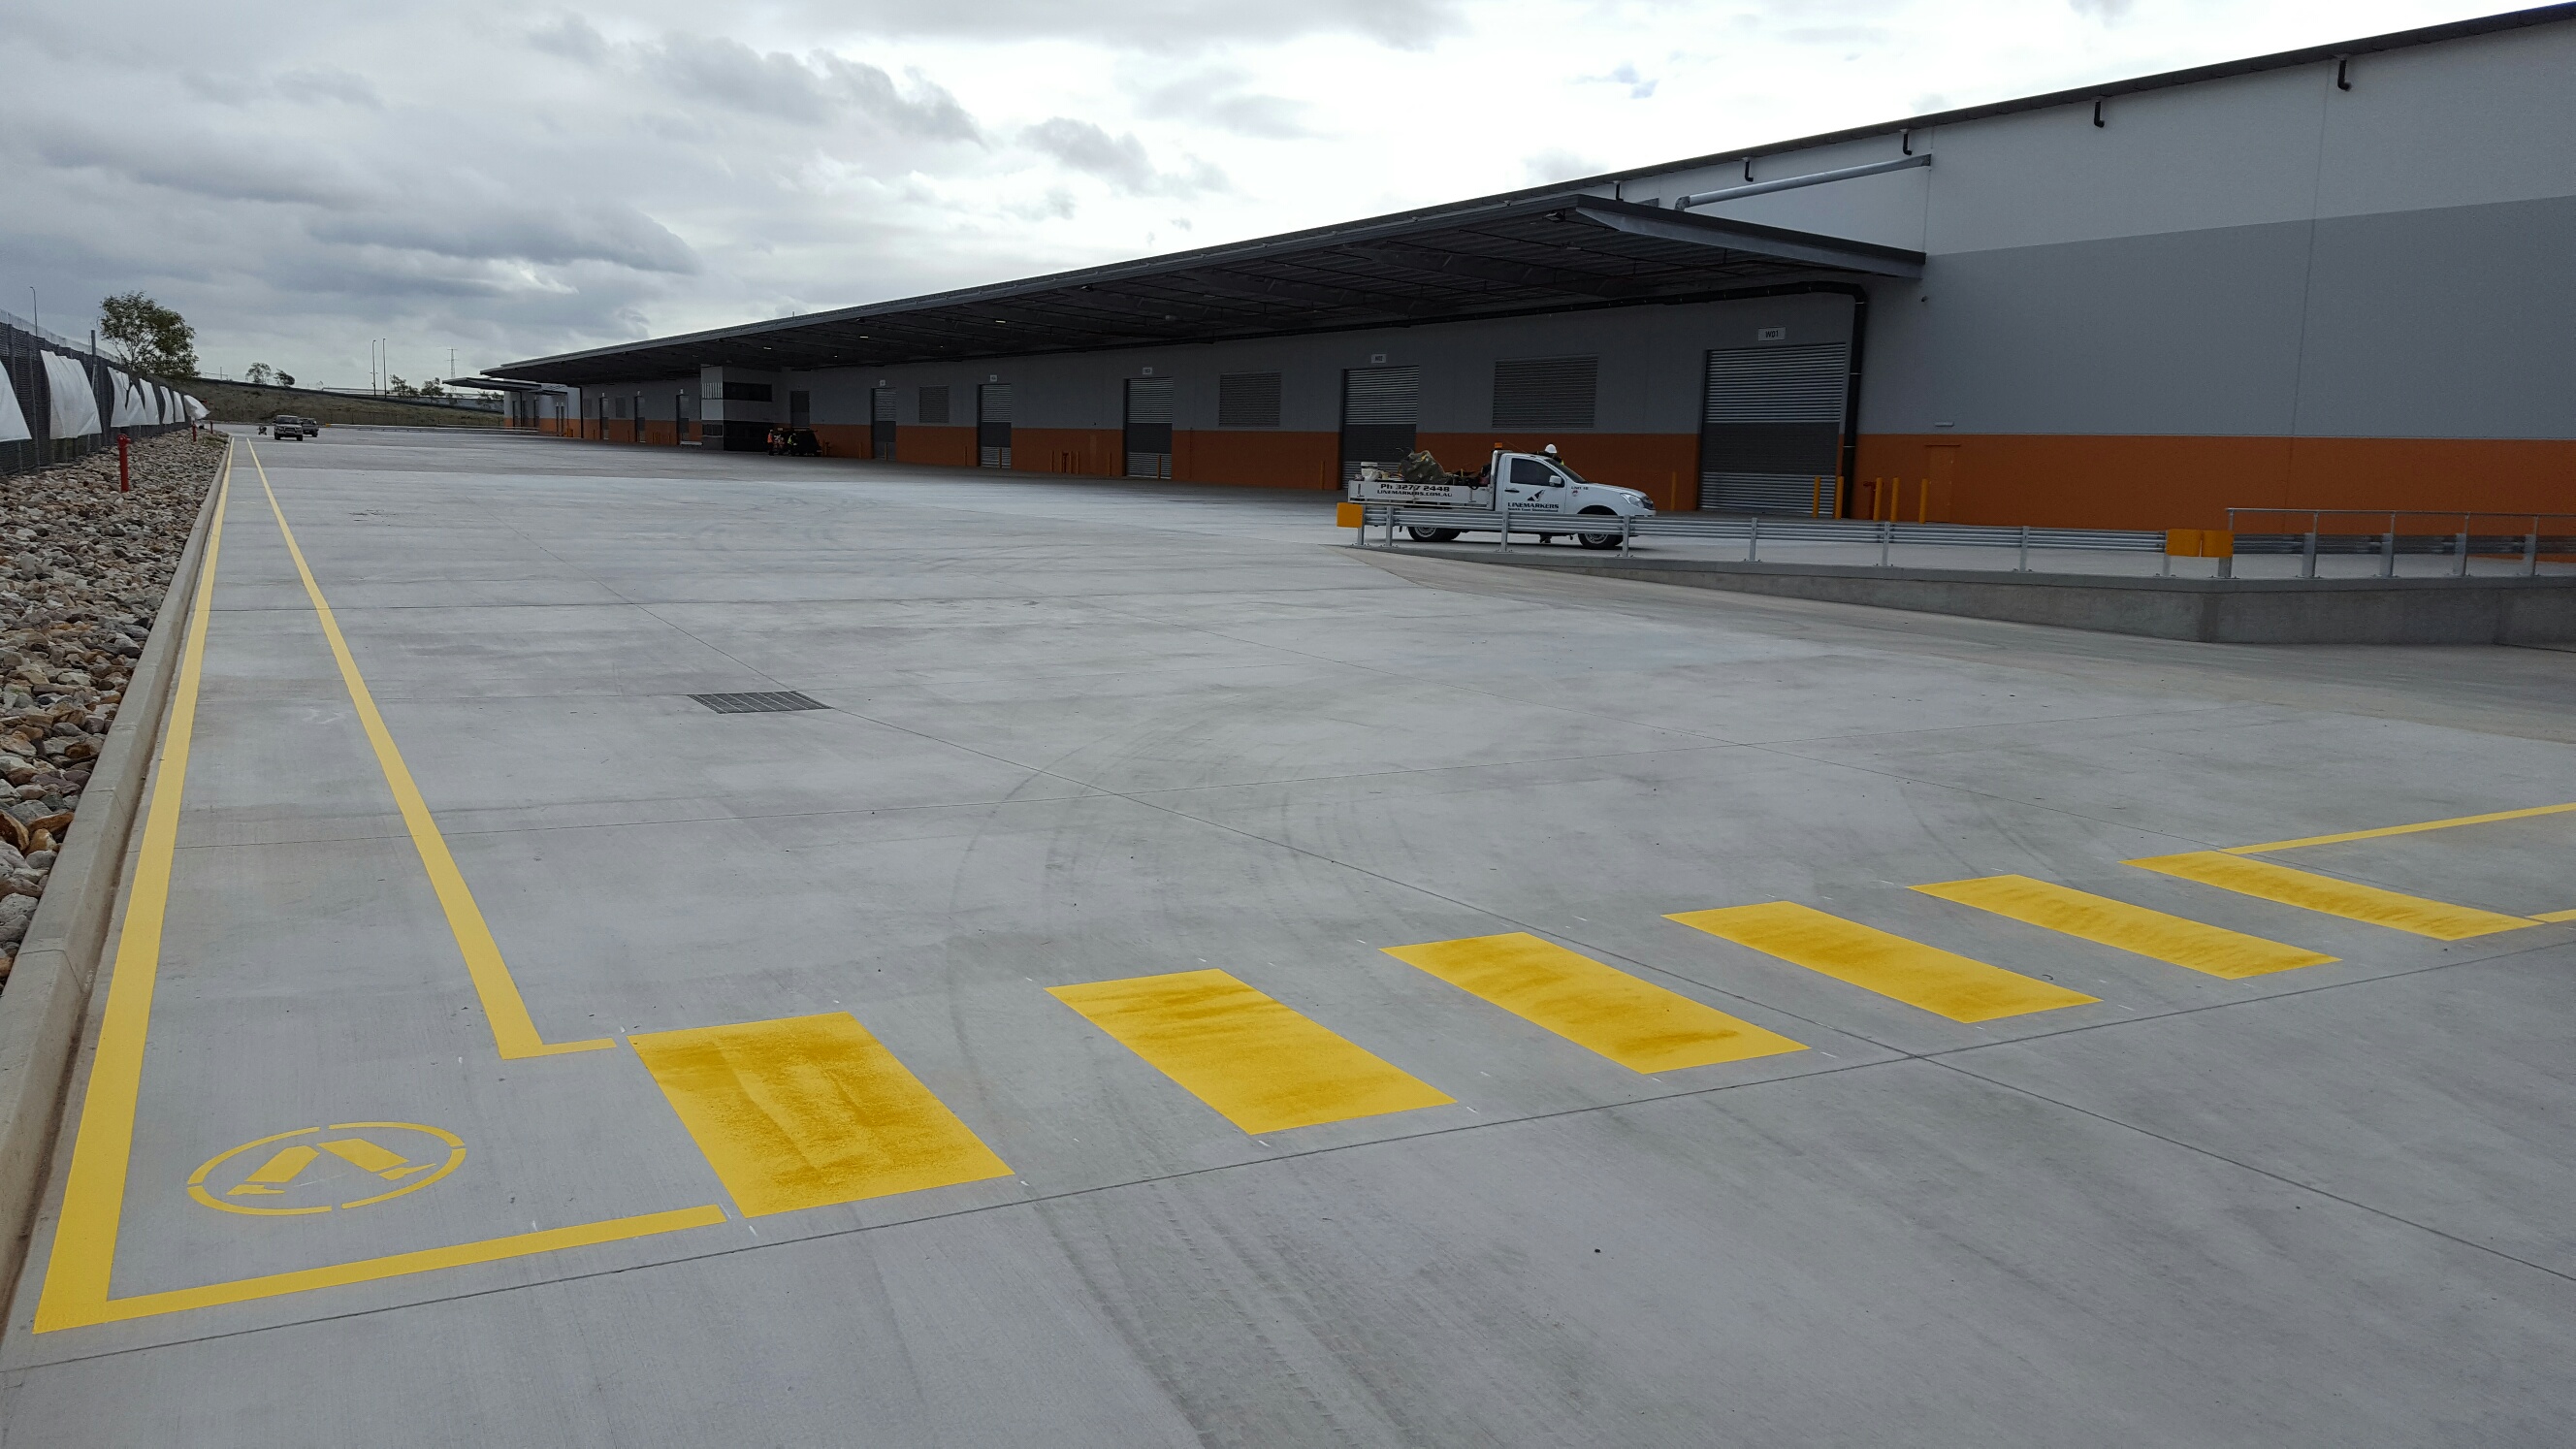 Warehouse With Long Walkway And Pedestrian Crossing Line Marking